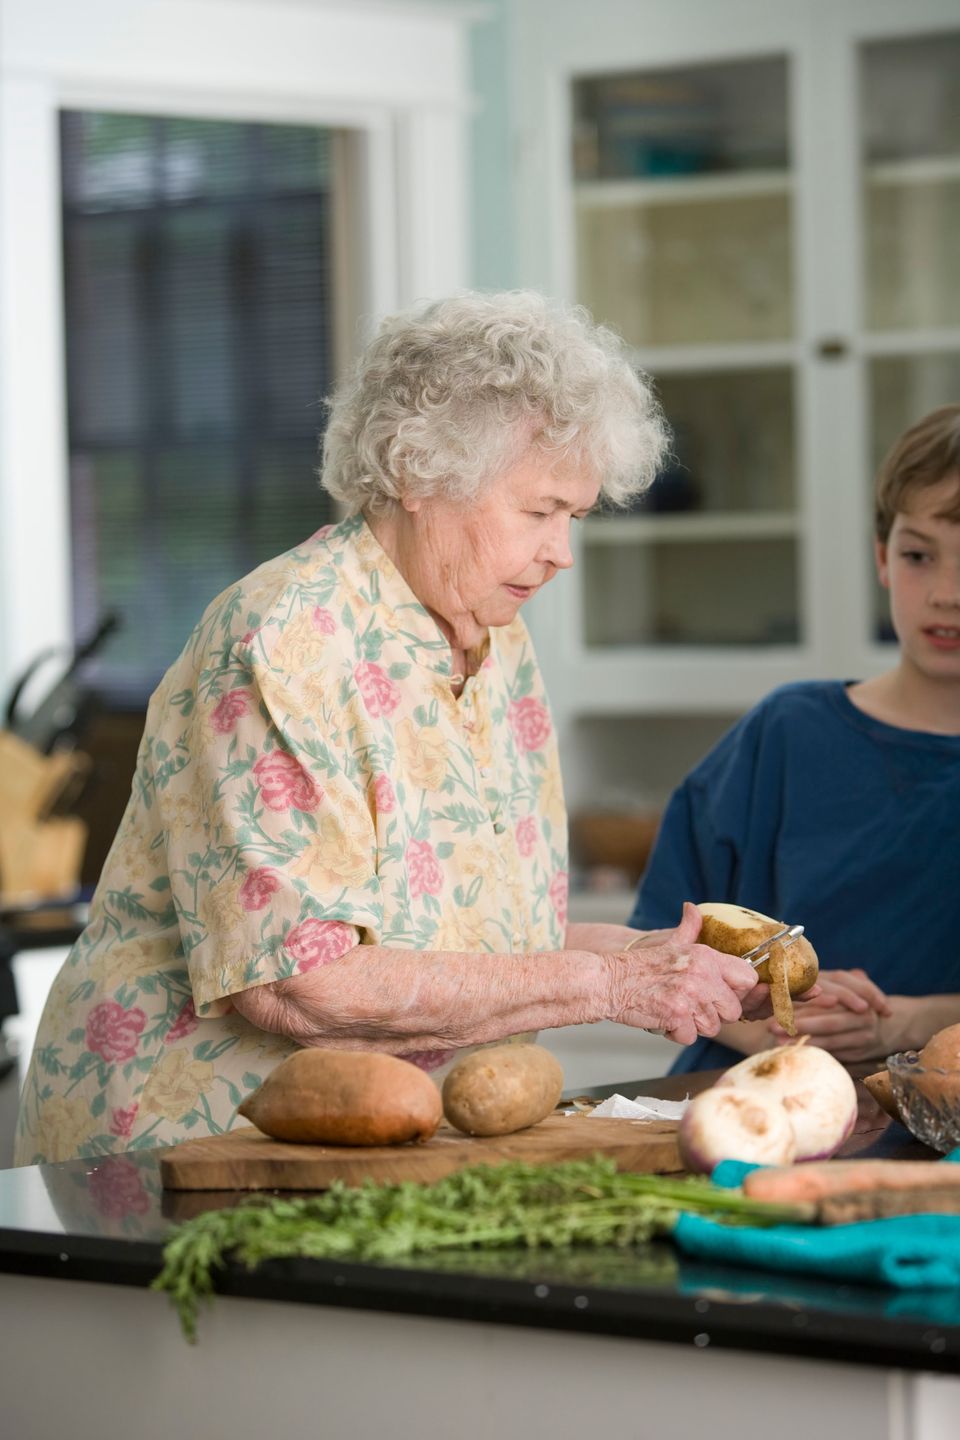 5 Lovely Ideas for Cheering Up Your Grandparents During Lockdown